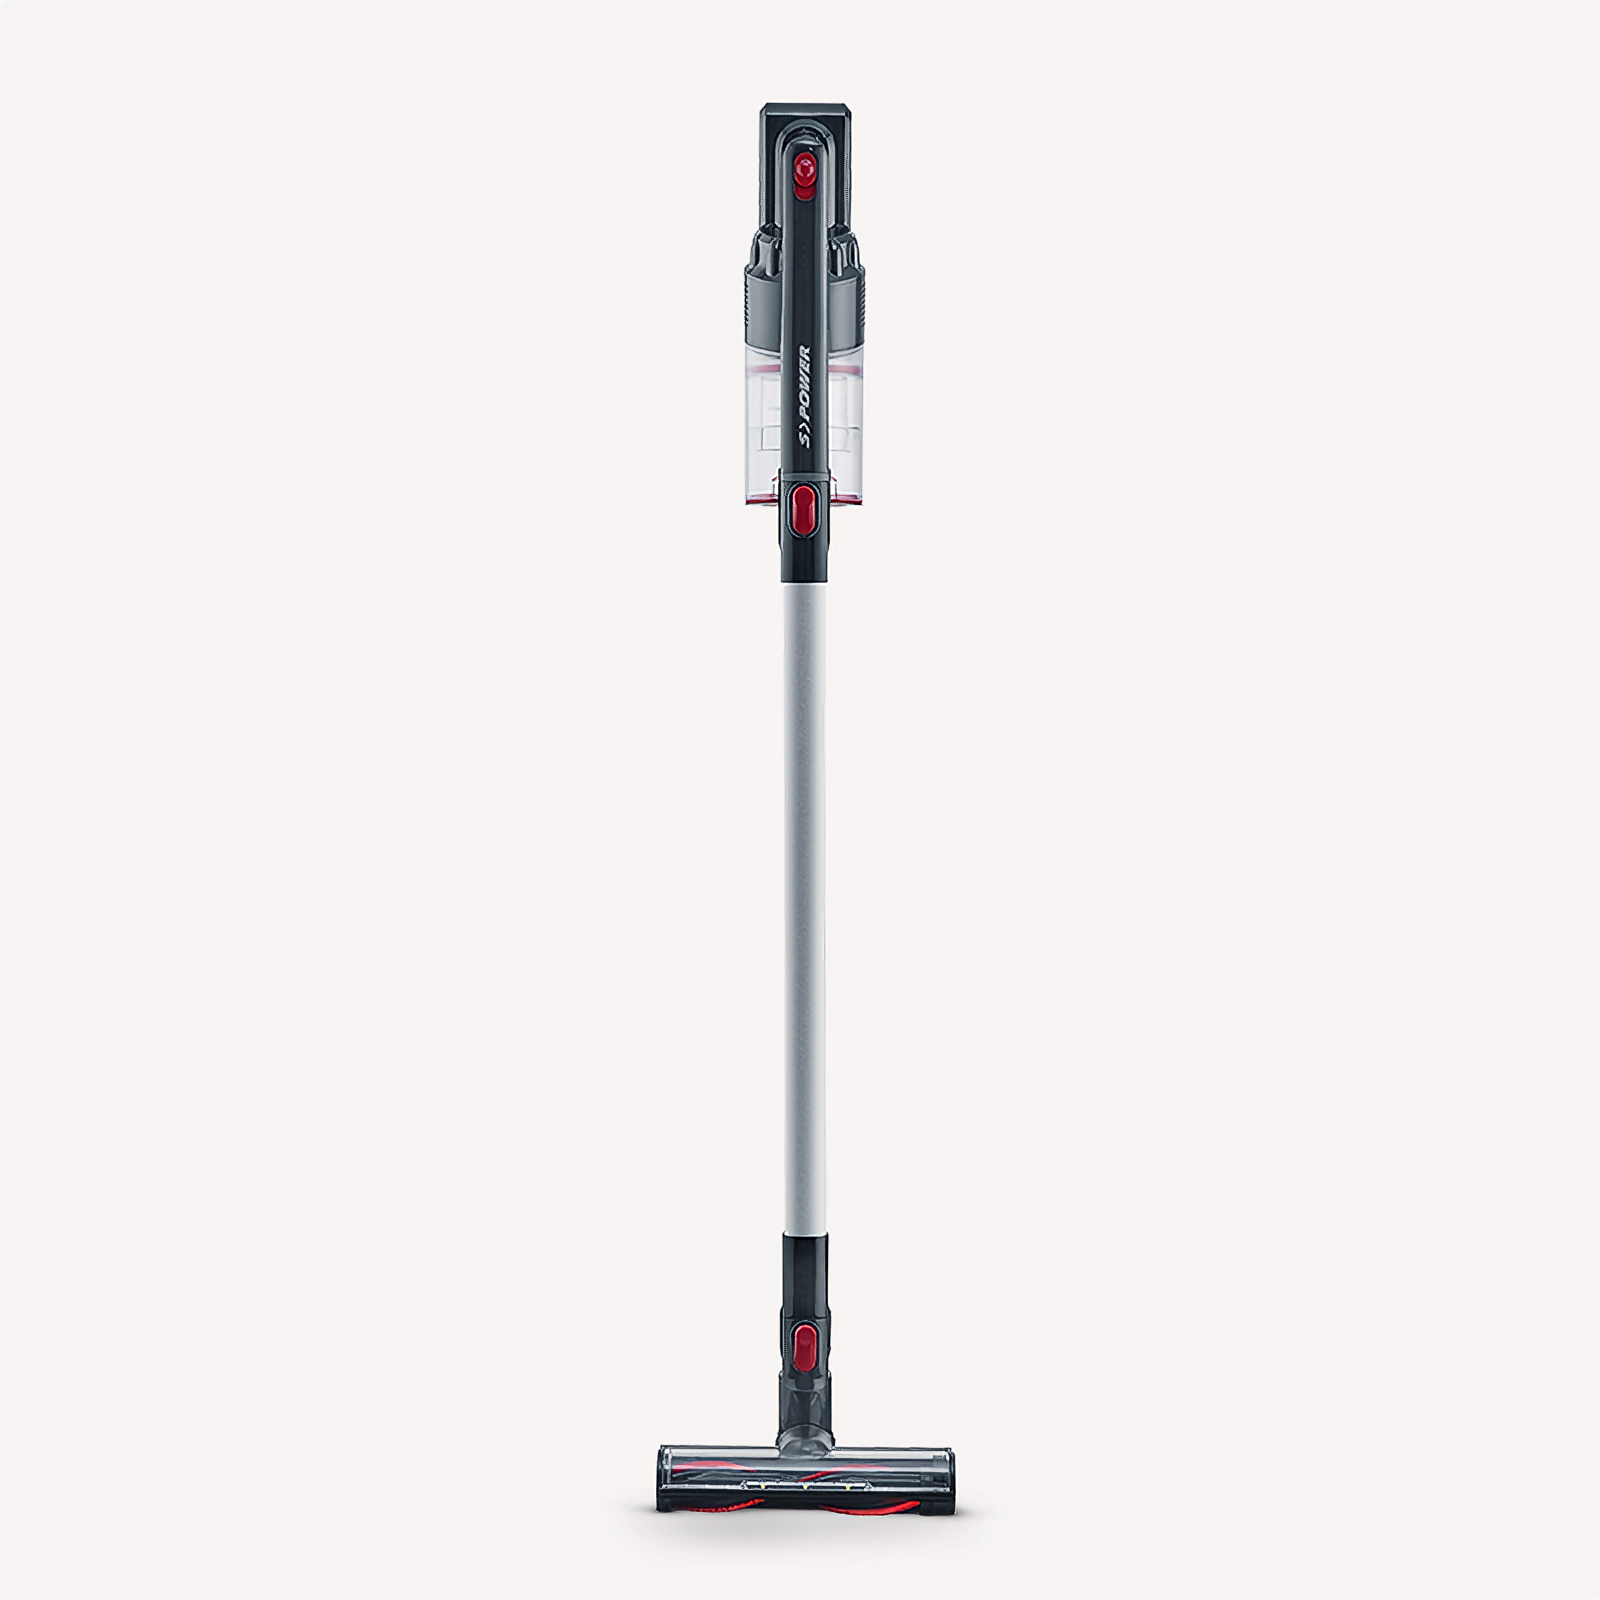 2-in-1 stick - SEVERIN hand 7153 vacuum (Official) and HV cleaner cordless